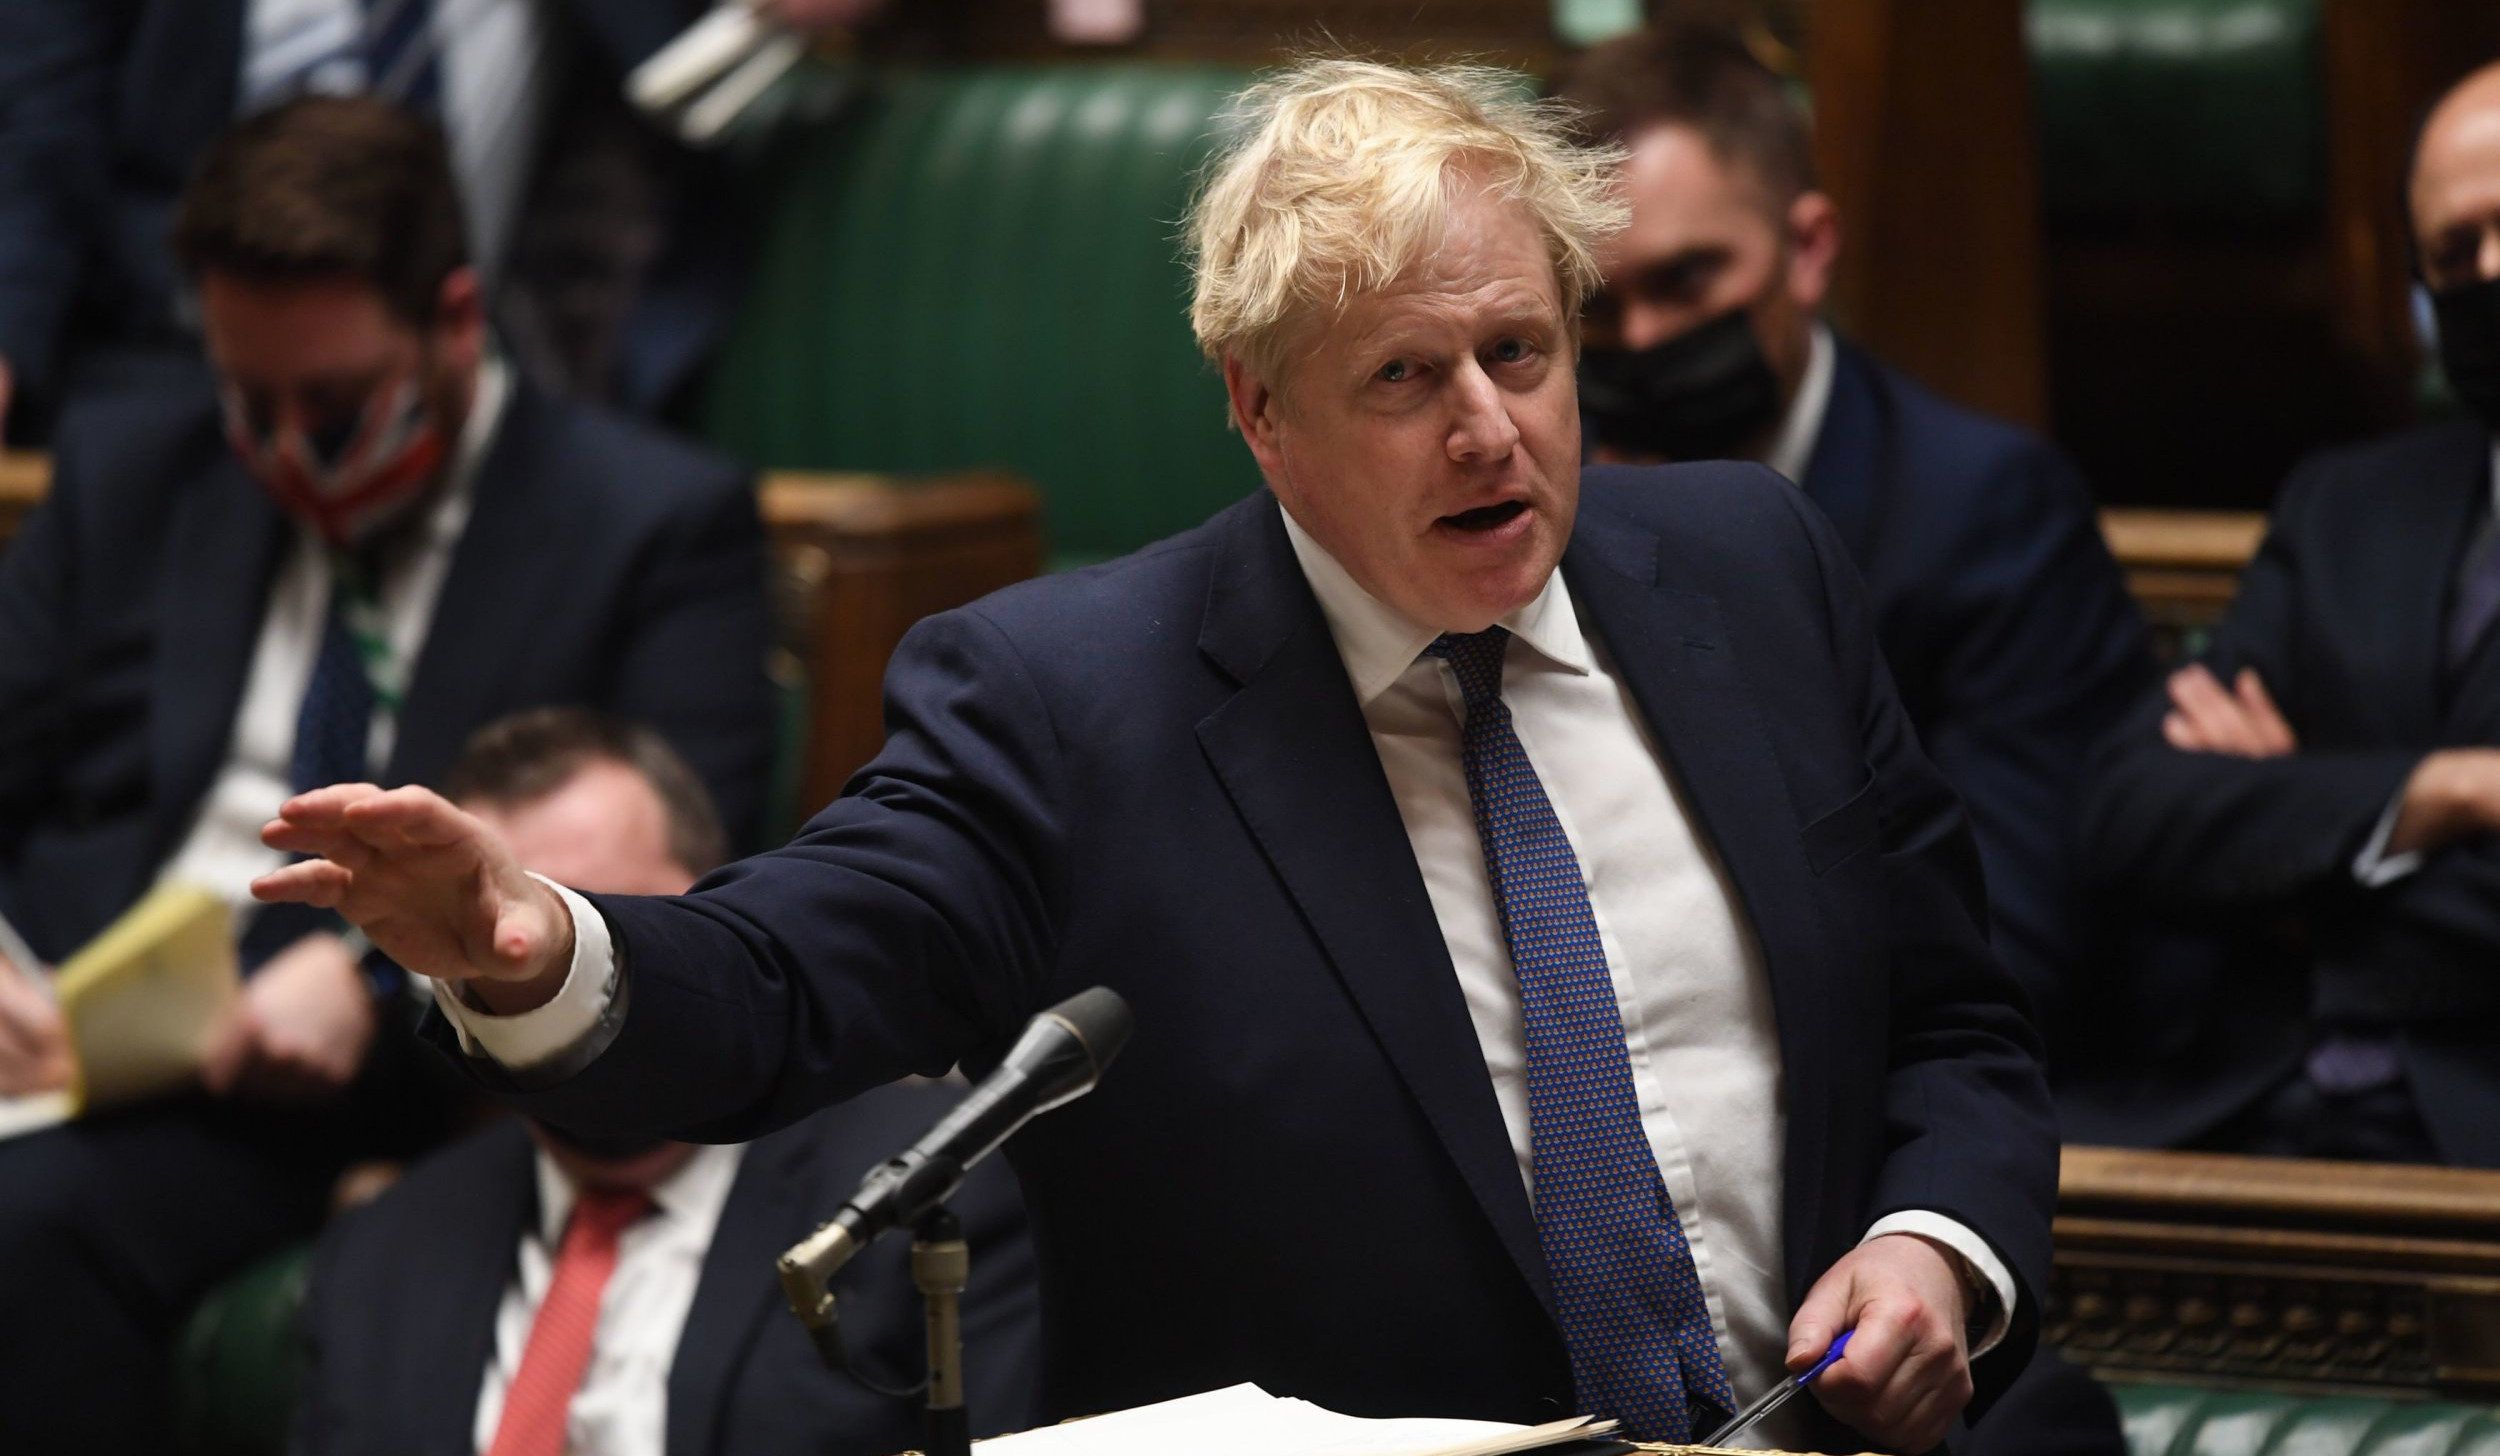 British PM Johnson and opposition leader clash in parliament over rail strikes